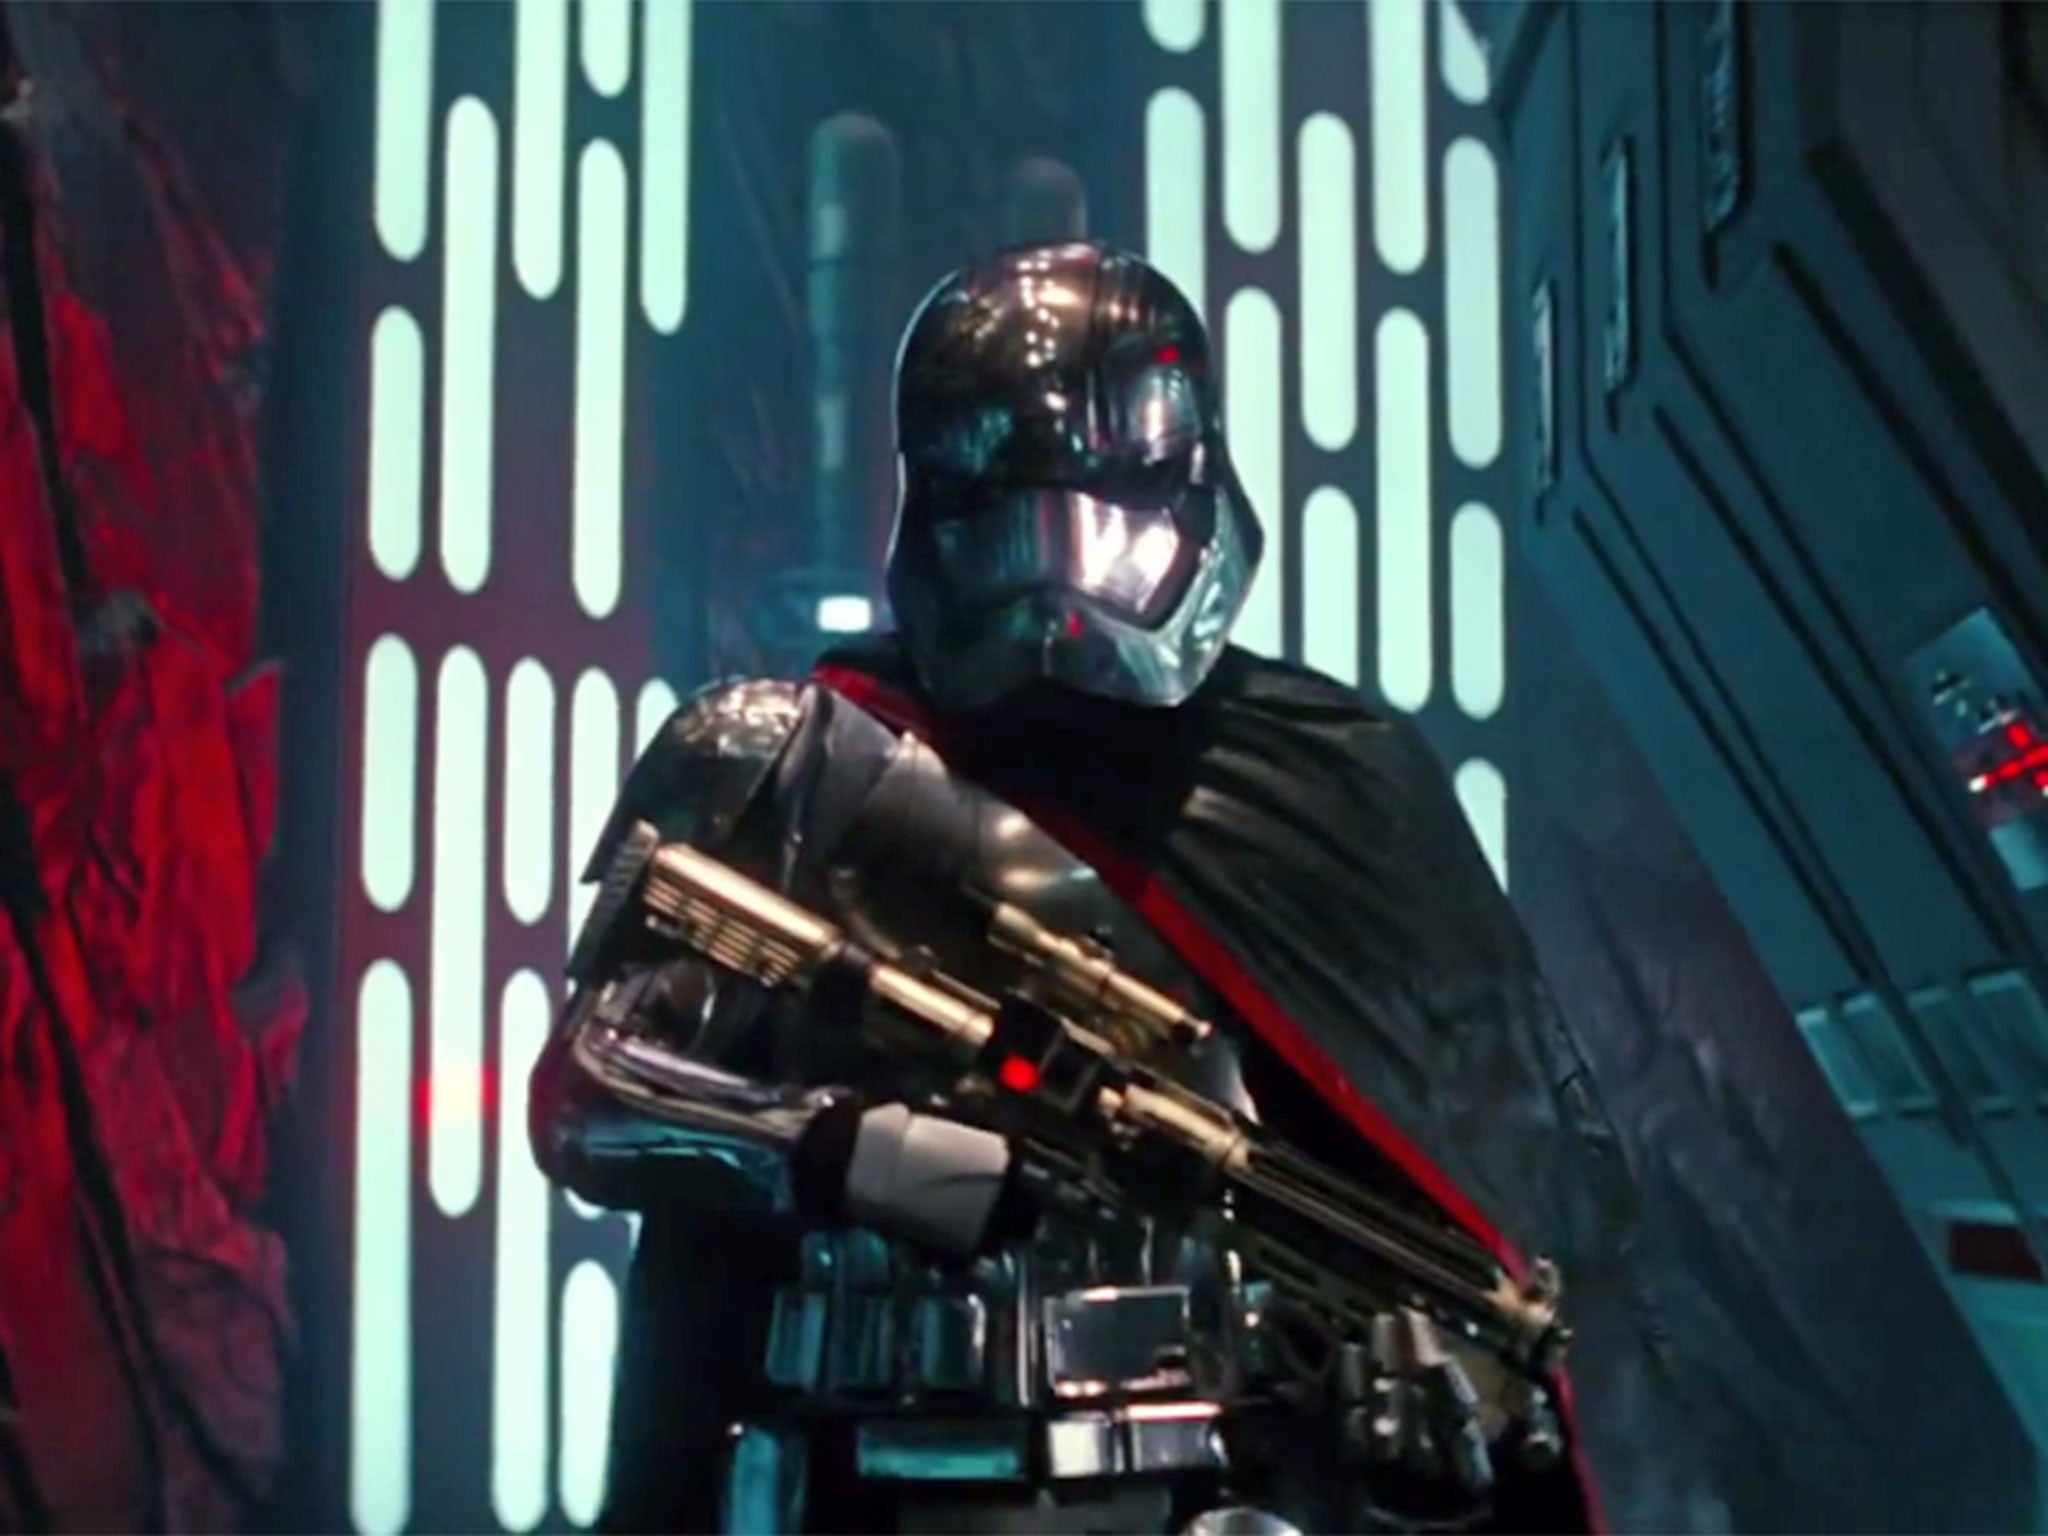 A still from the first trailer of Star Wars: The Force Awakens